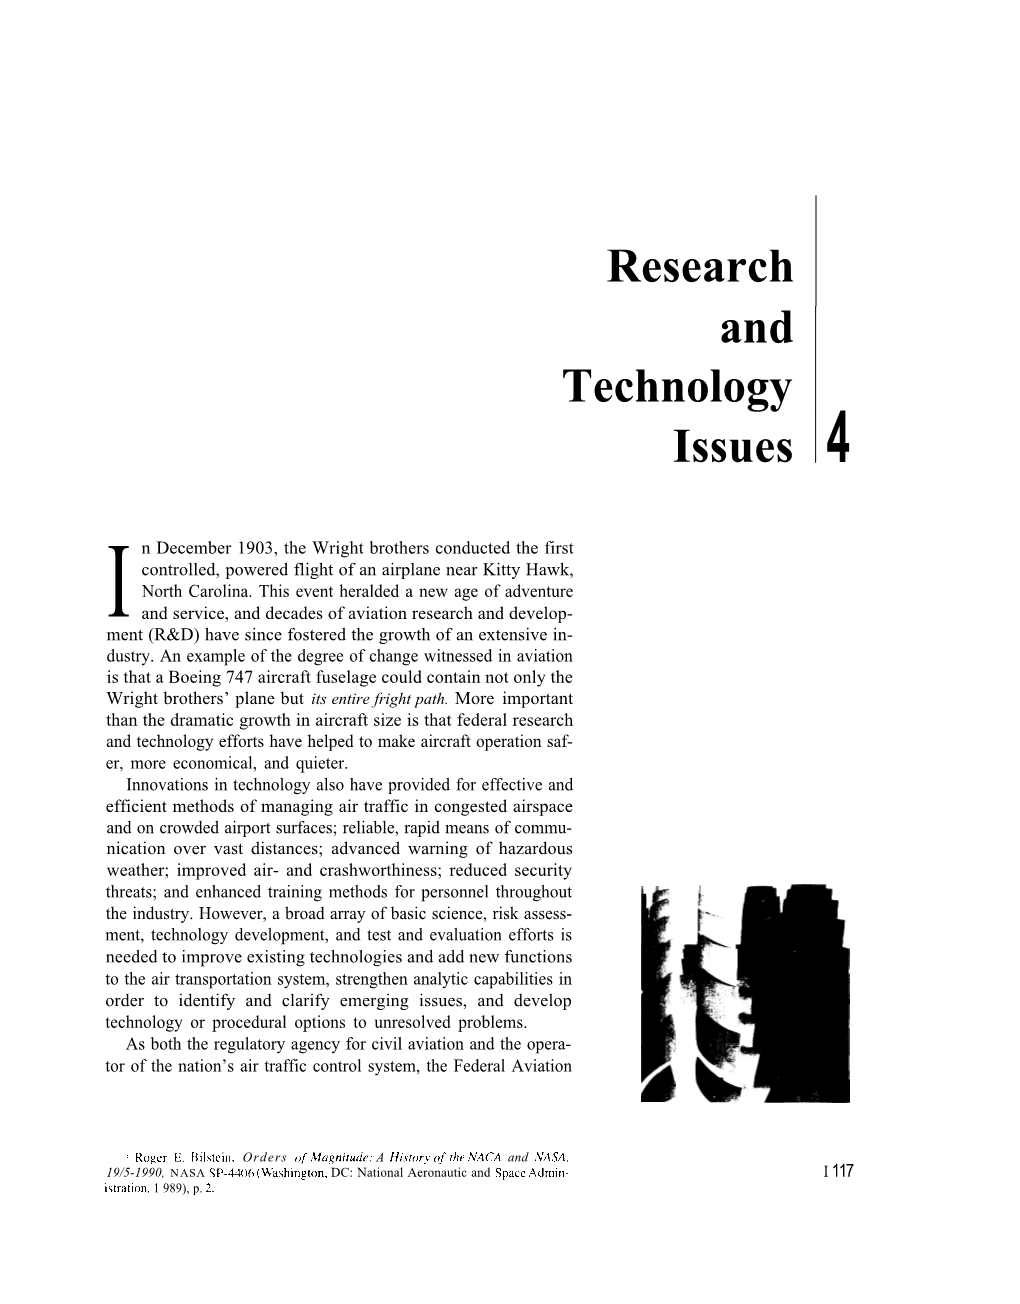 Federal Research and Technology for Aviation